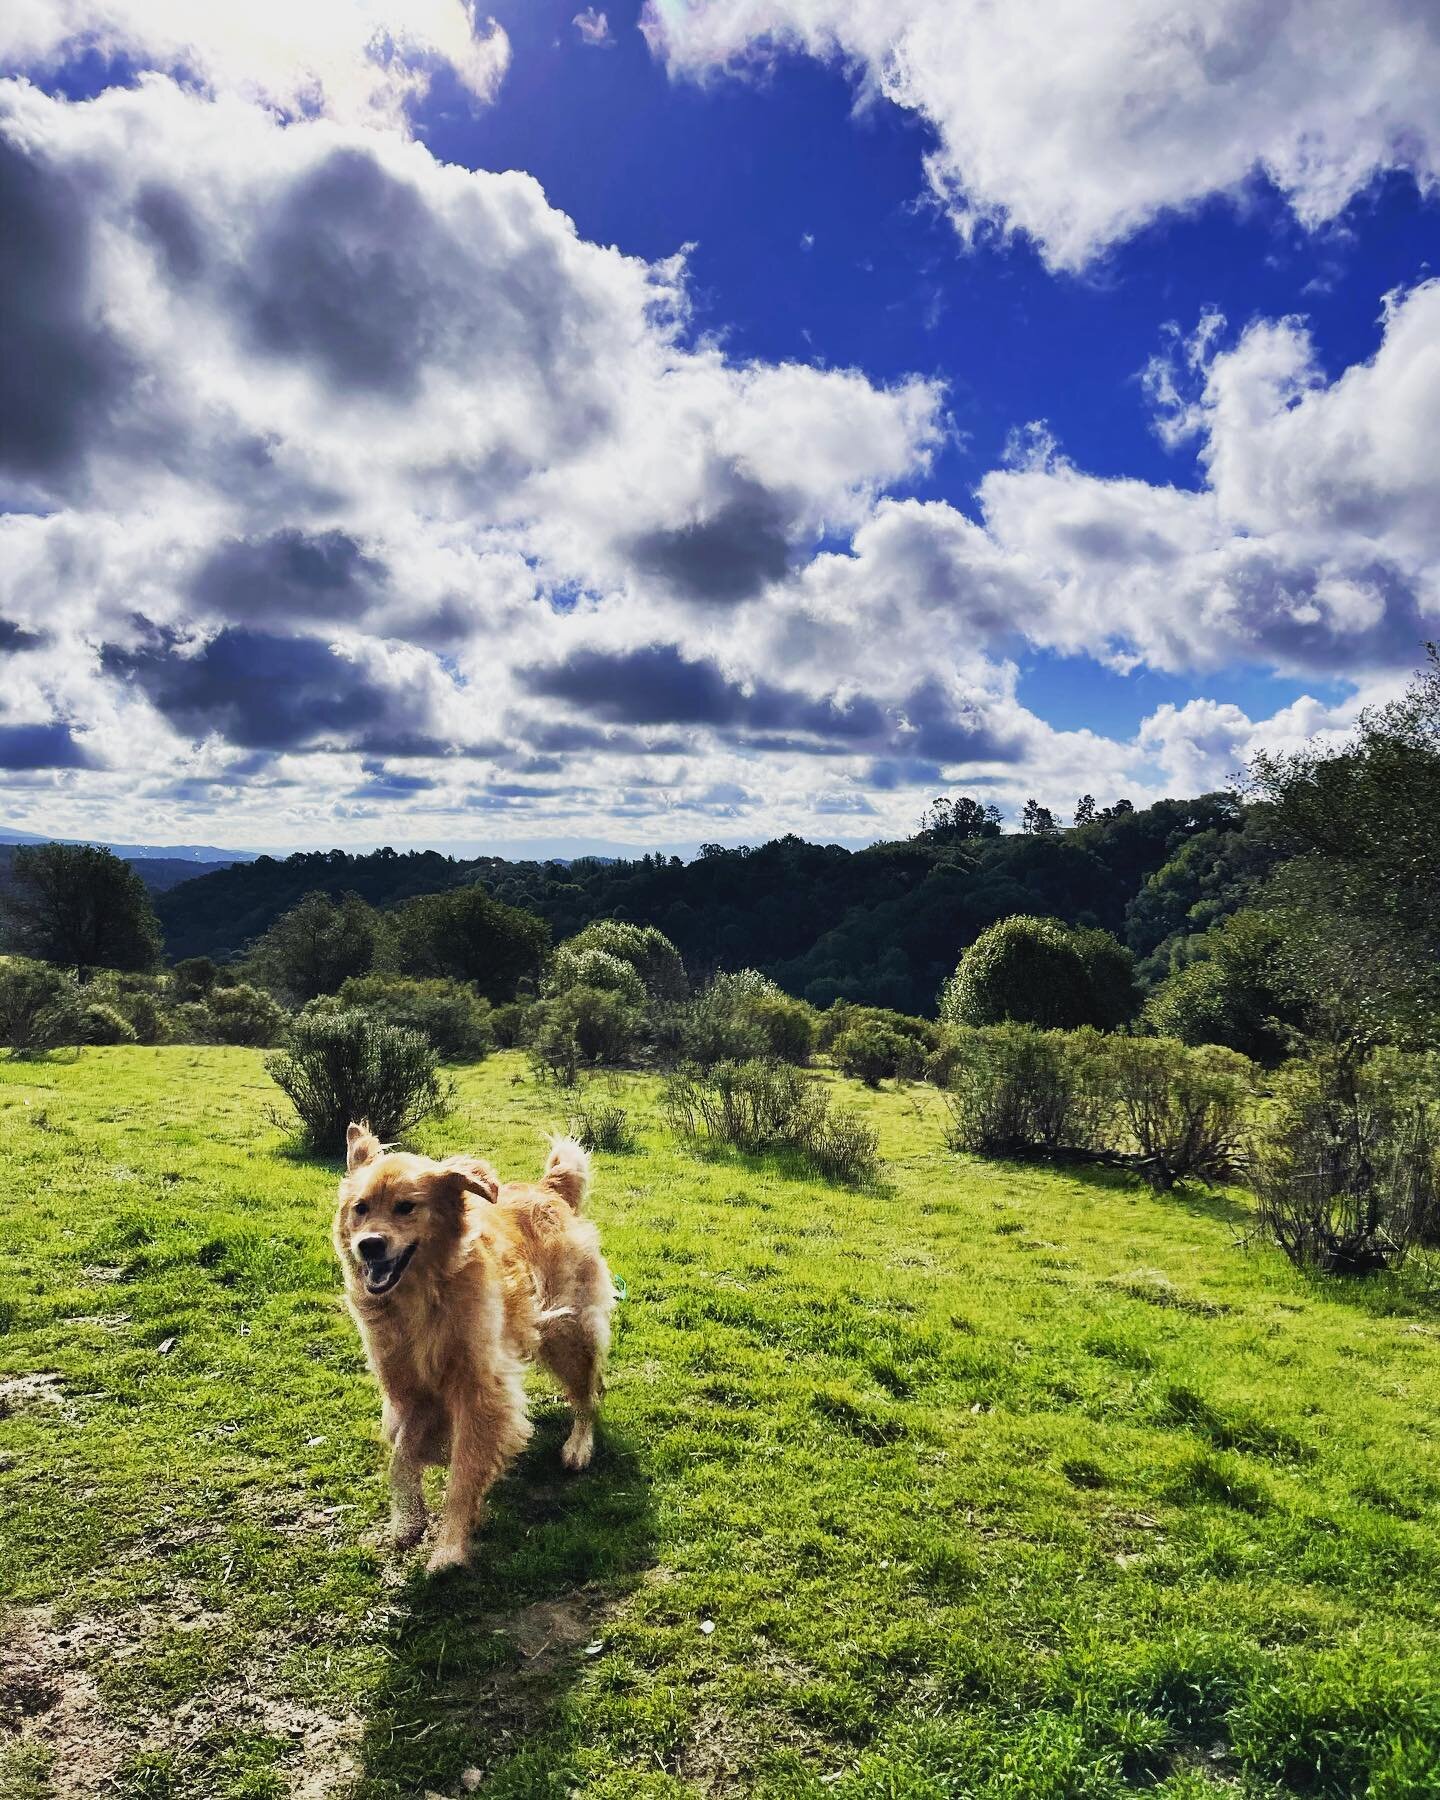 Jumping into Monday with this beautiful Bay weather! #dirtydog #dirtydoghikes #ebrp #ebrpd #dogwalking #dogwalkers #offleash #doghikes #doghiking #oaklanddog #oaklanddogs #oaklanddogwalking
#oaklanddogwalker #puppro #doggo #doggos #puppy #pup #pupper